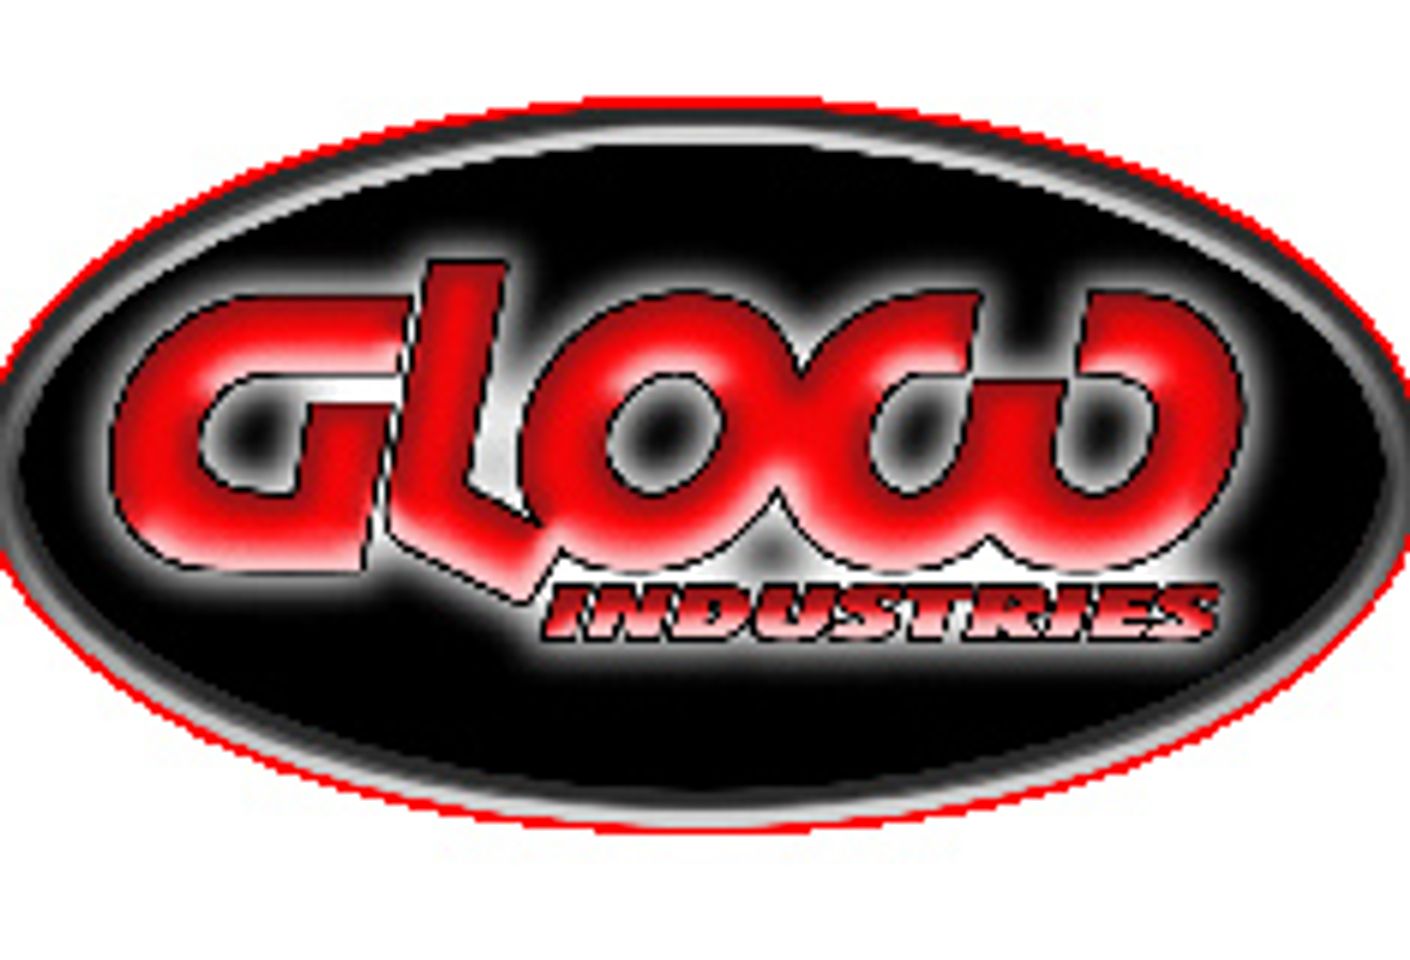 Glow Industries Calls ‘Lights, Camera, Action!’ With Infomercial Series